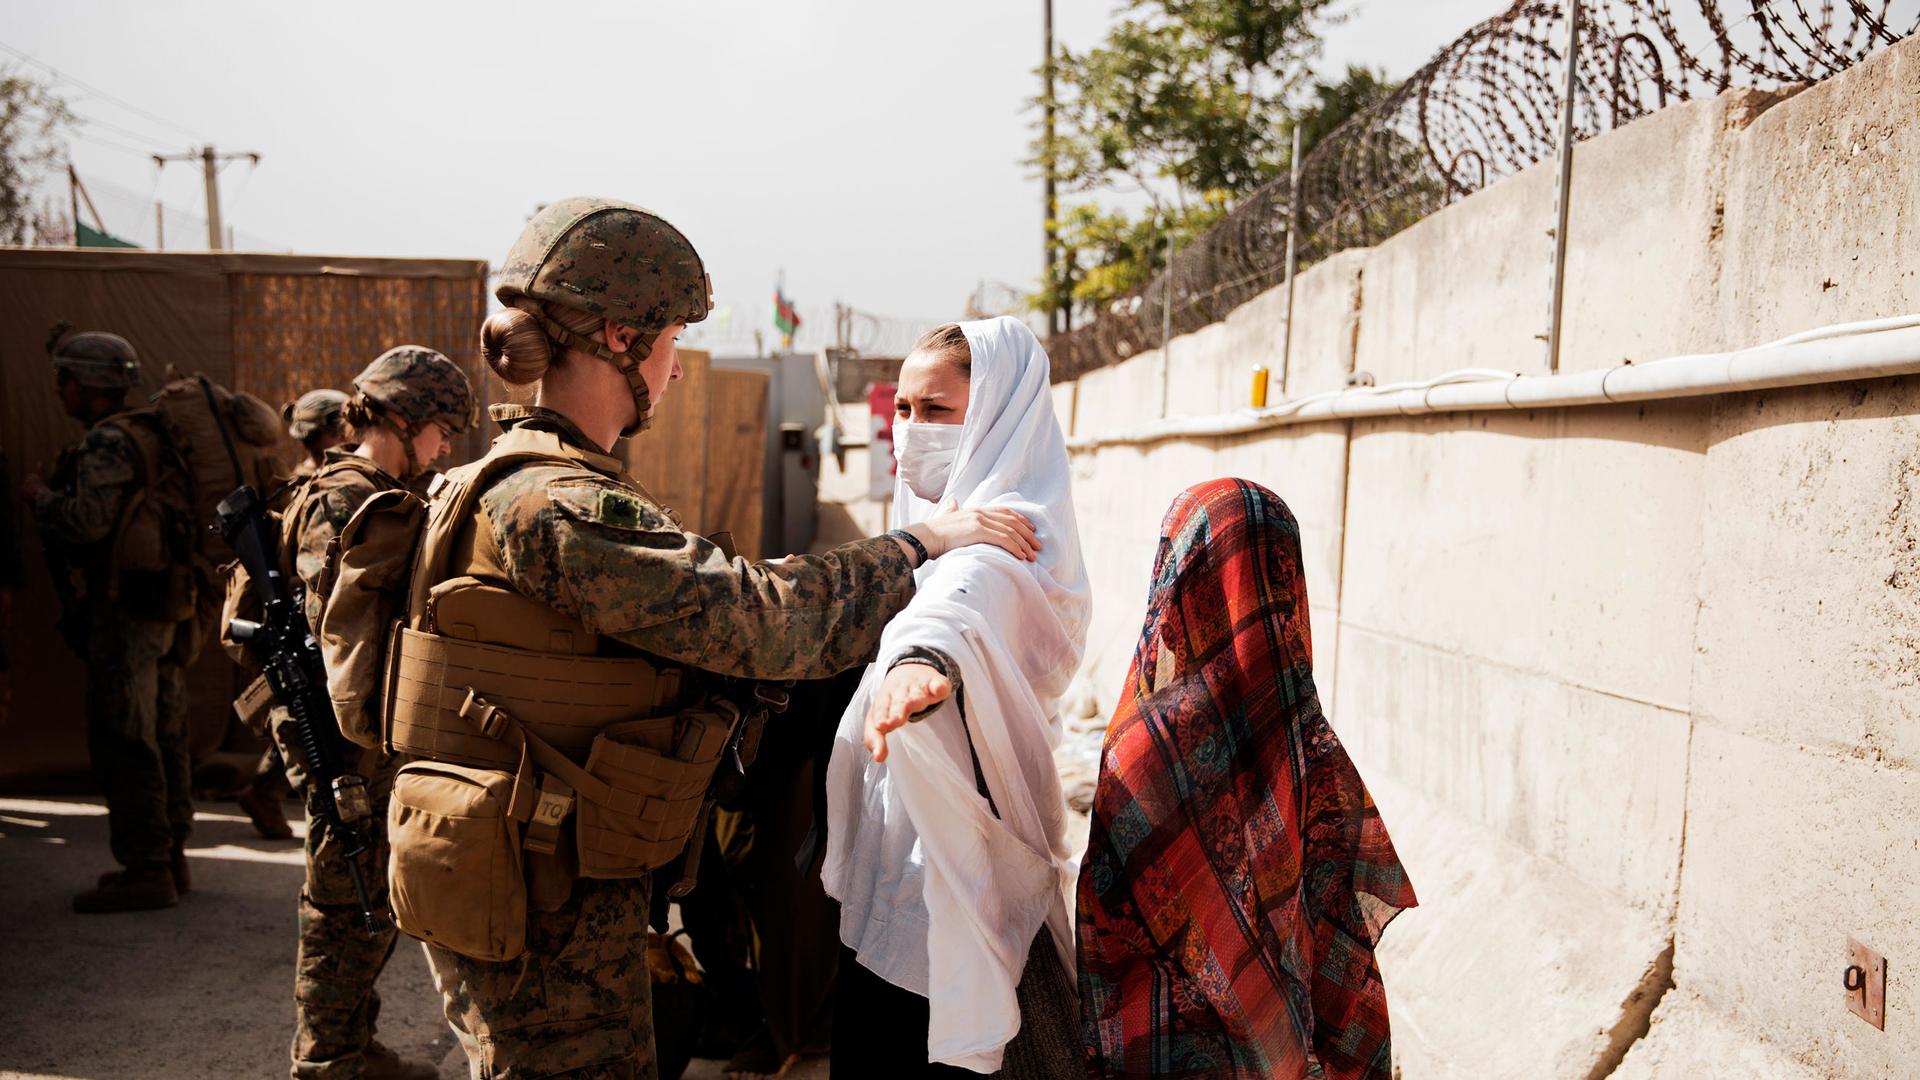 In this photo provided by the US Marine Corps, two civilians during processing through an Evacuee Control Checkpoint during an evacuation at Hamid Karzai International Airport, in Kabul, Afghanistan, Wednesday, Aug. 18, 2021. 